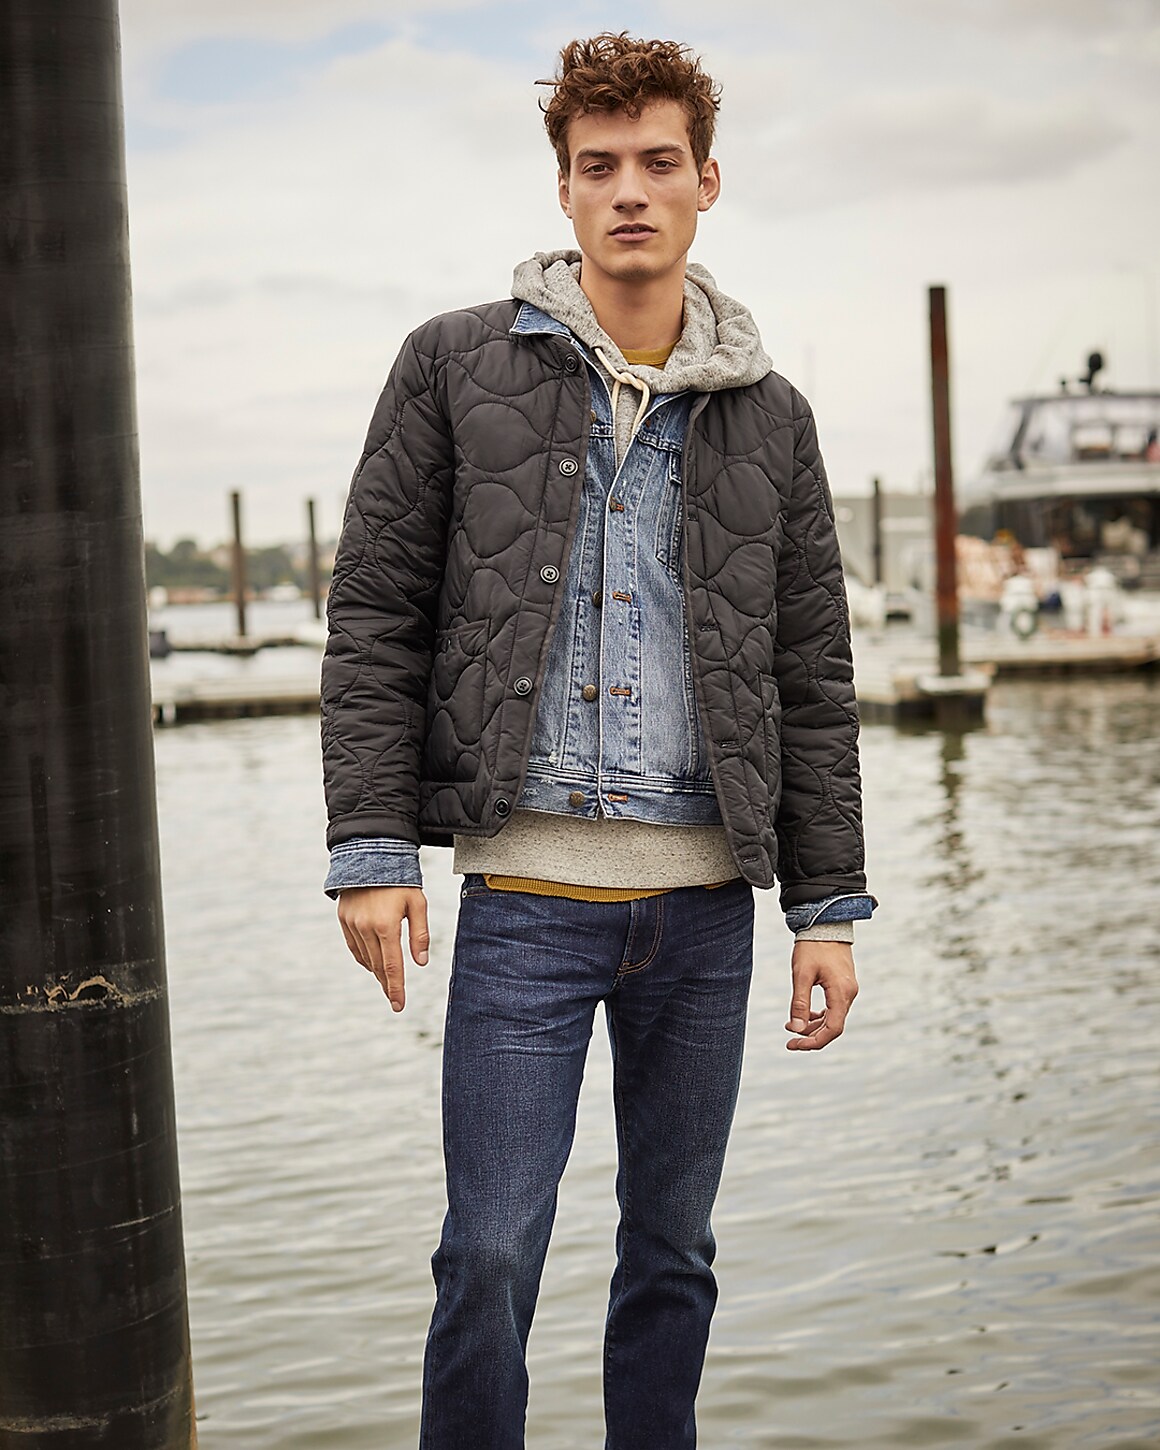 3-in-1 If By Sea: A Bedford Convertible Parka Adventure Story